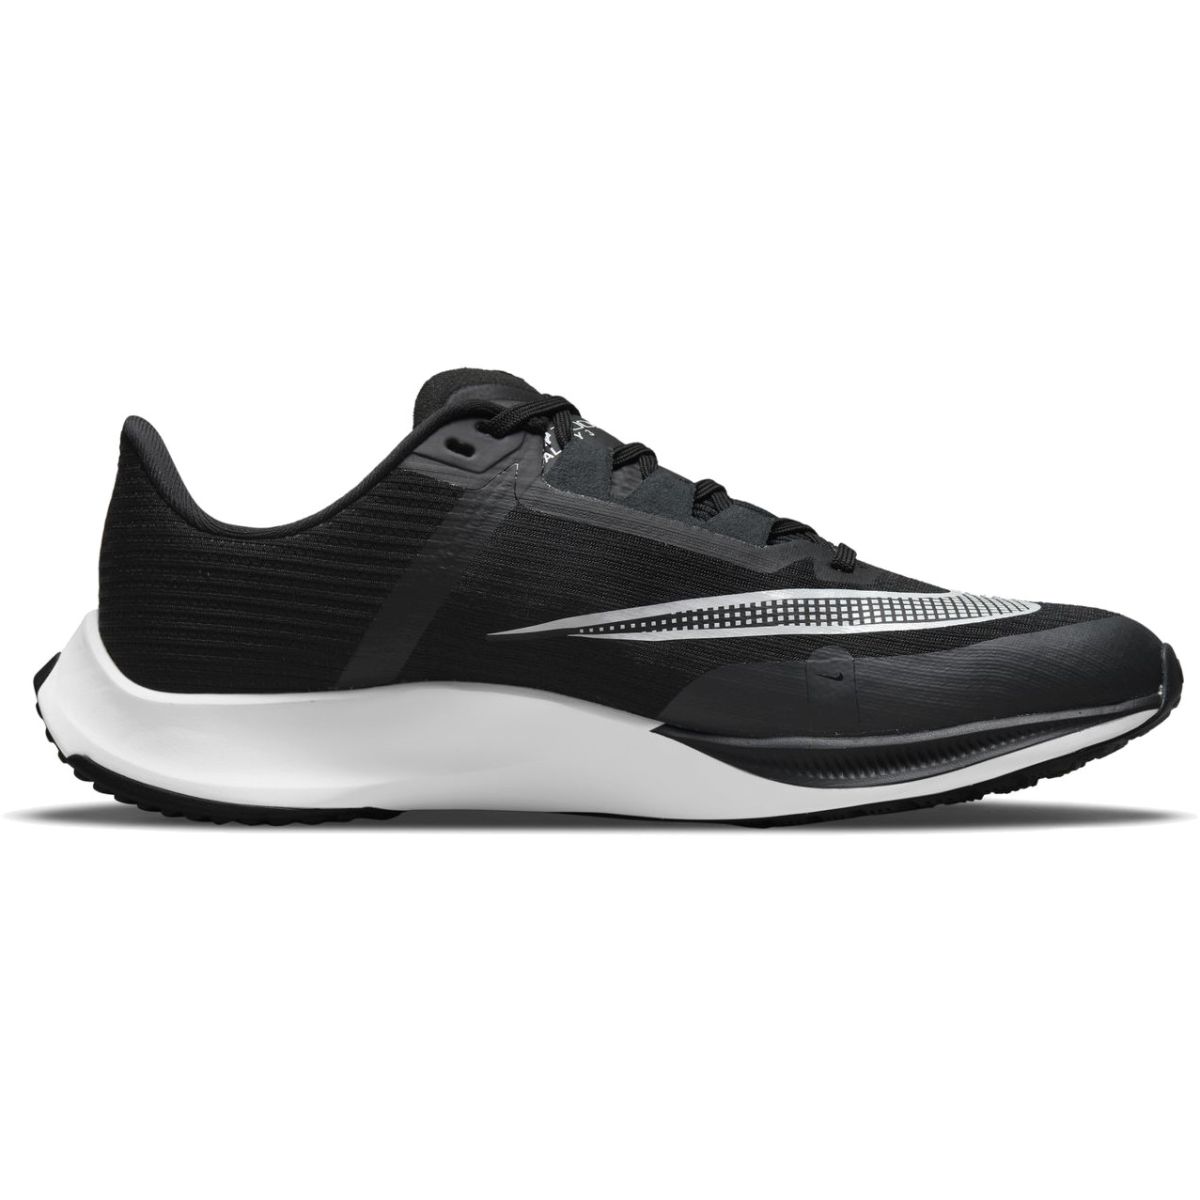 Nike Rival Fly 3 Men's Road Racing Shoes CT2405-001